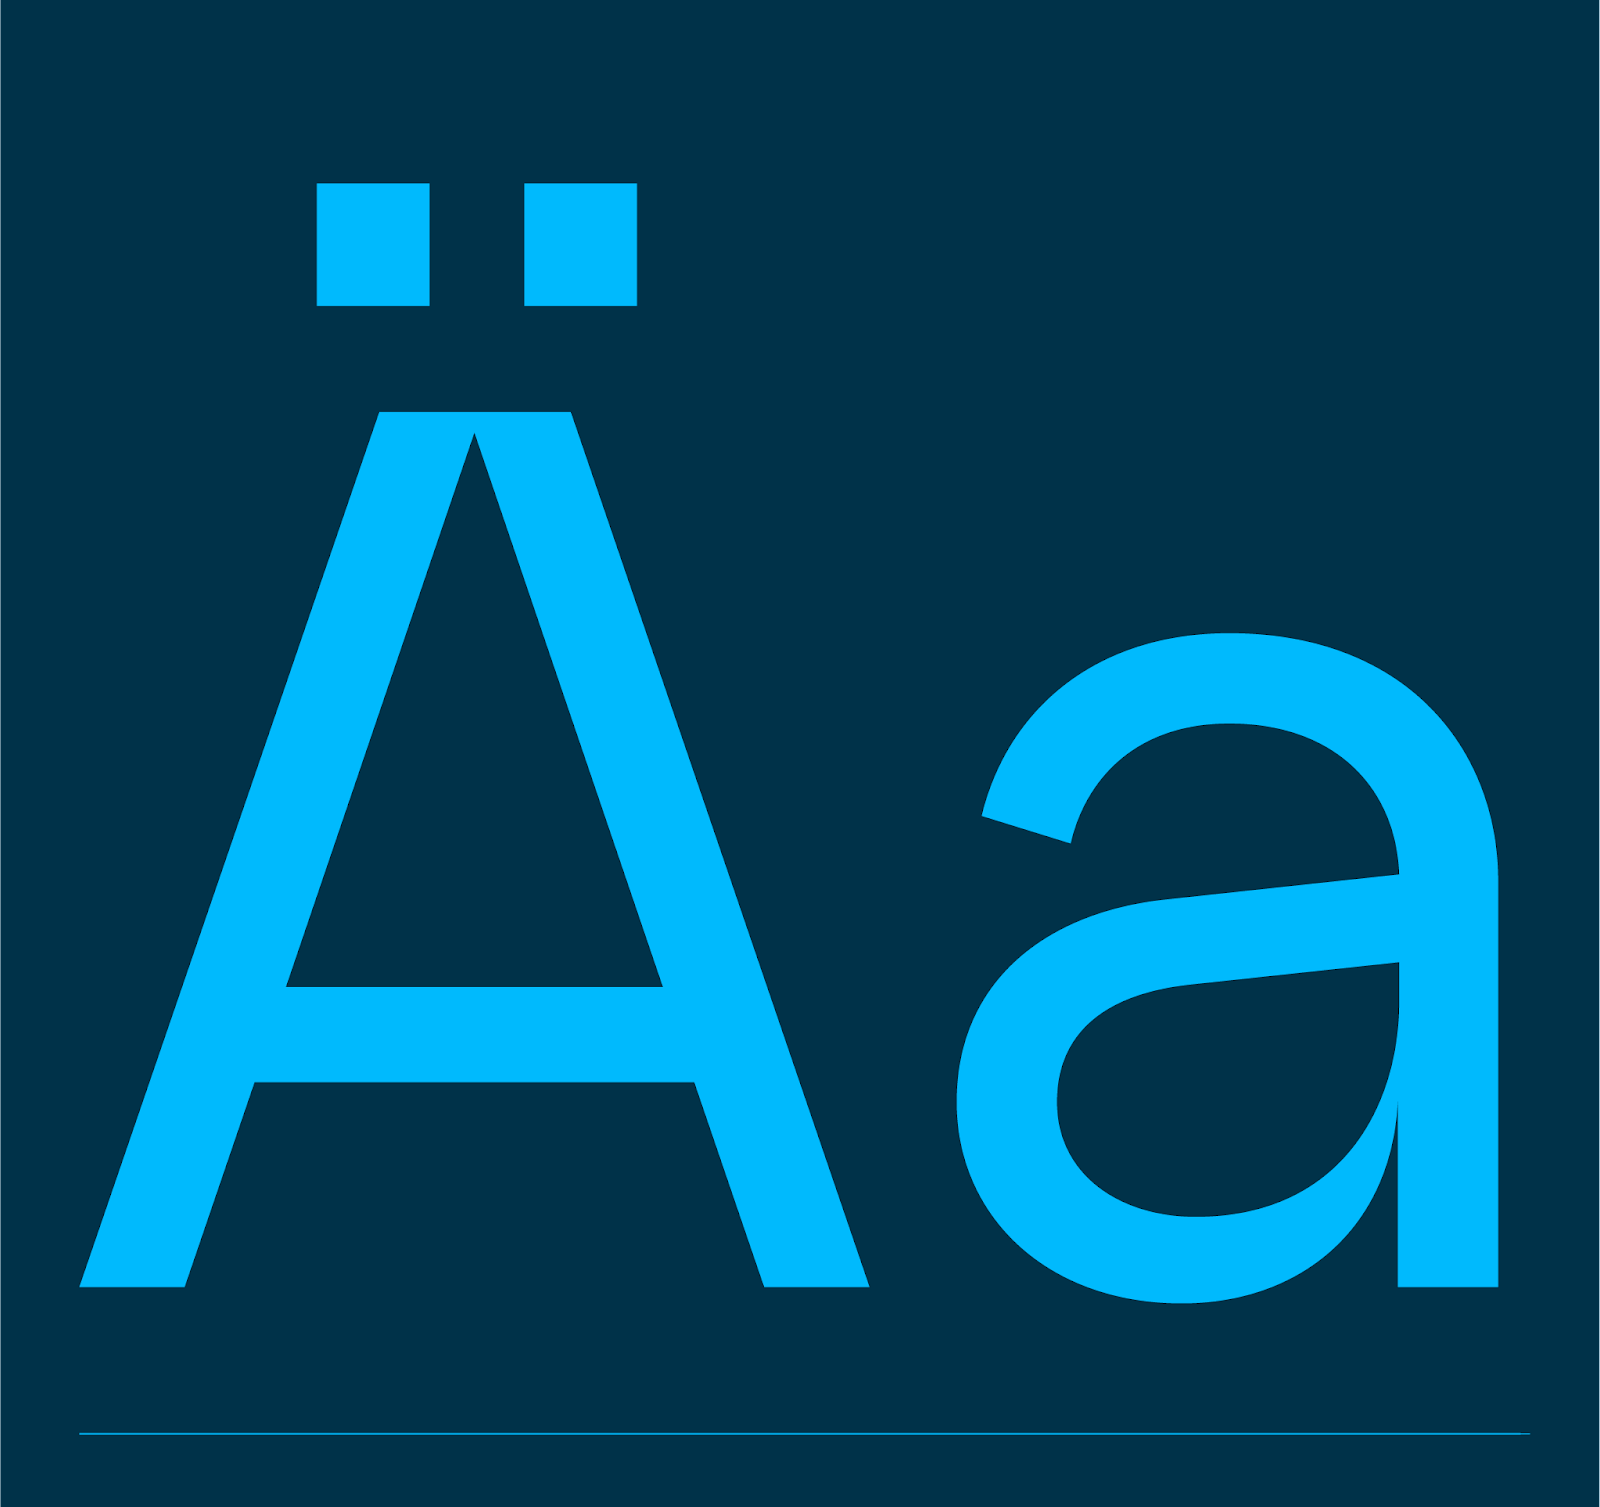 Artifact from the Safiro Font: Mastery in Font Design & Typography article on Abduzeedo